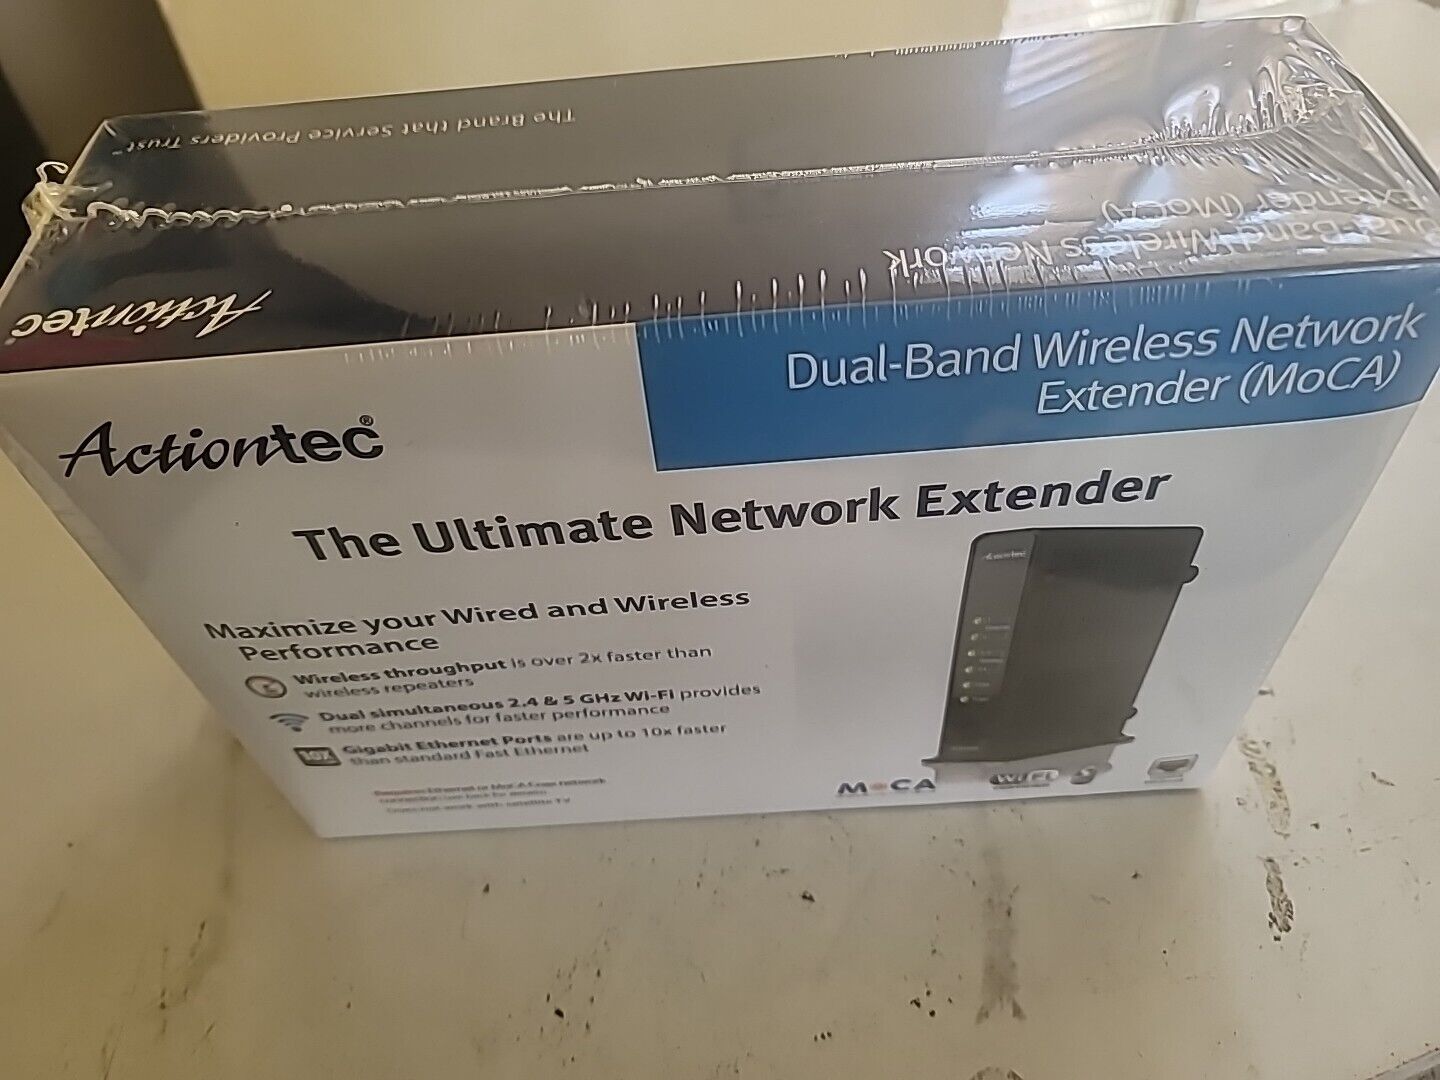 Brand New Actiontec WCB3000N  Dual Band Wireless Network Extender Sealed